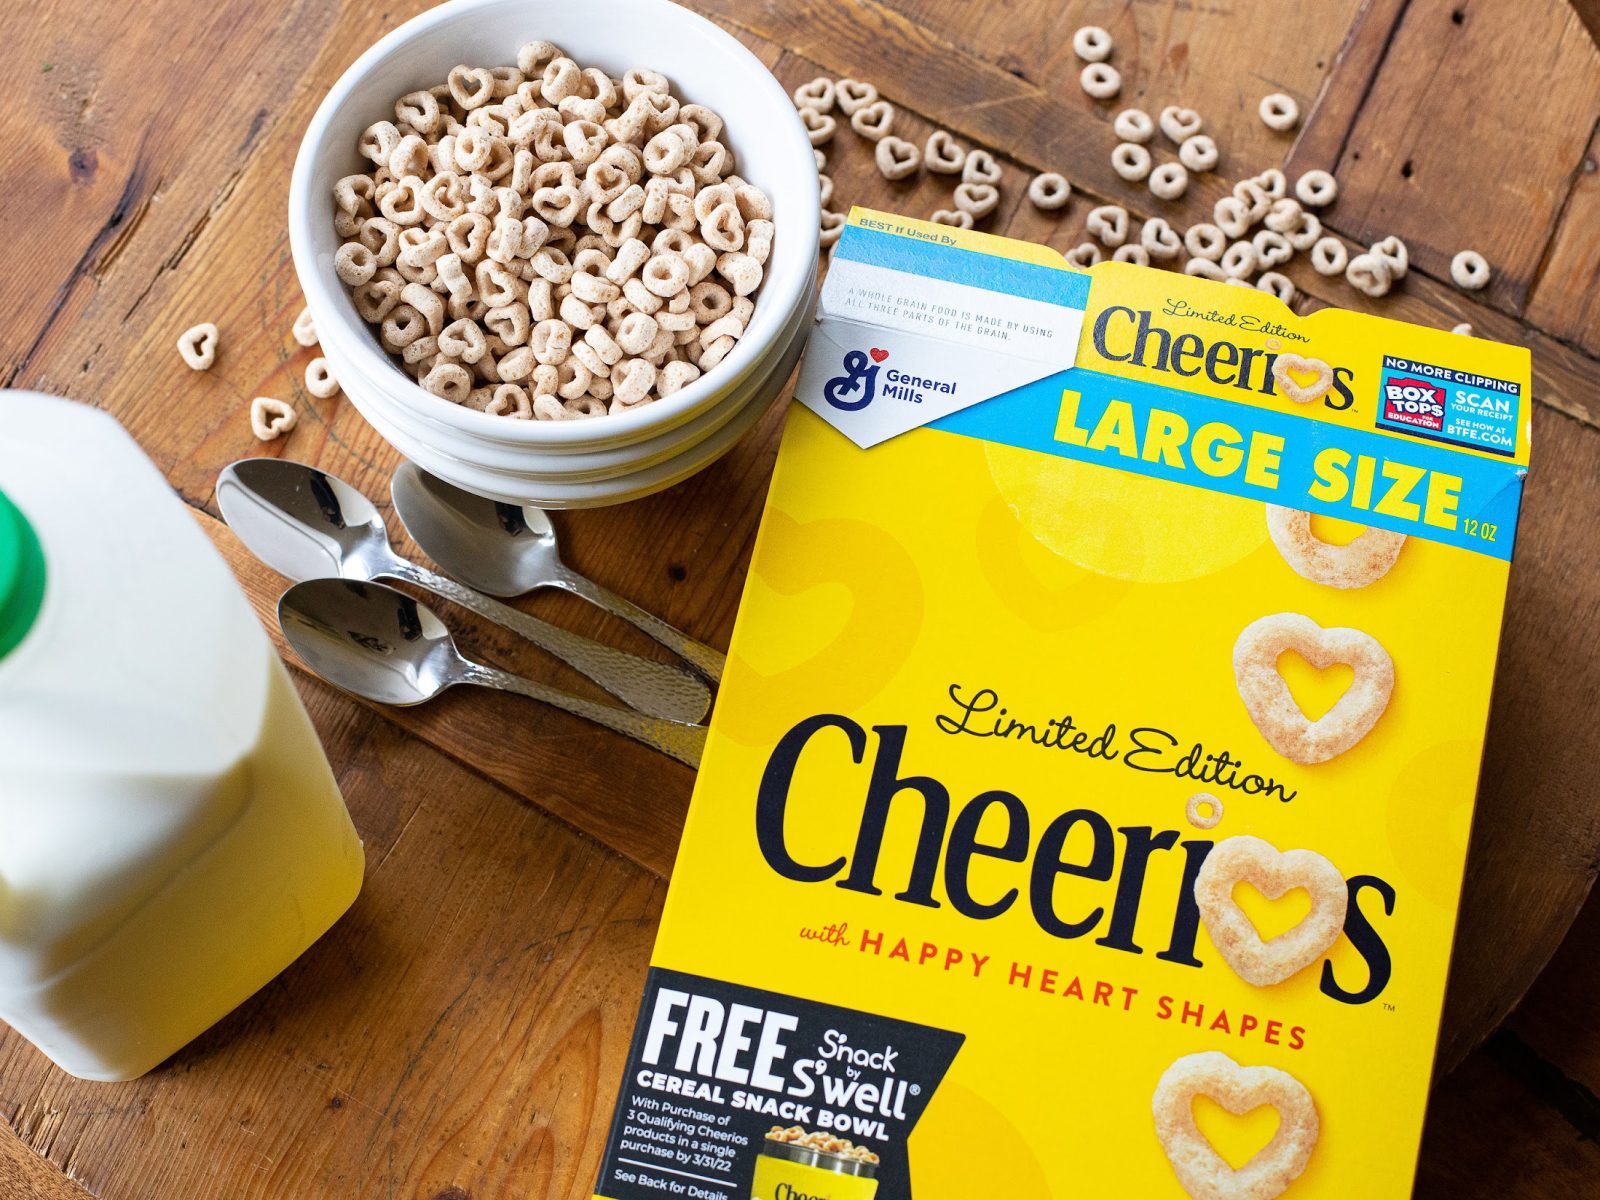 Get The Big Boxes Of General Mills Cheerios Cereal As Low As $1.85 At Publix